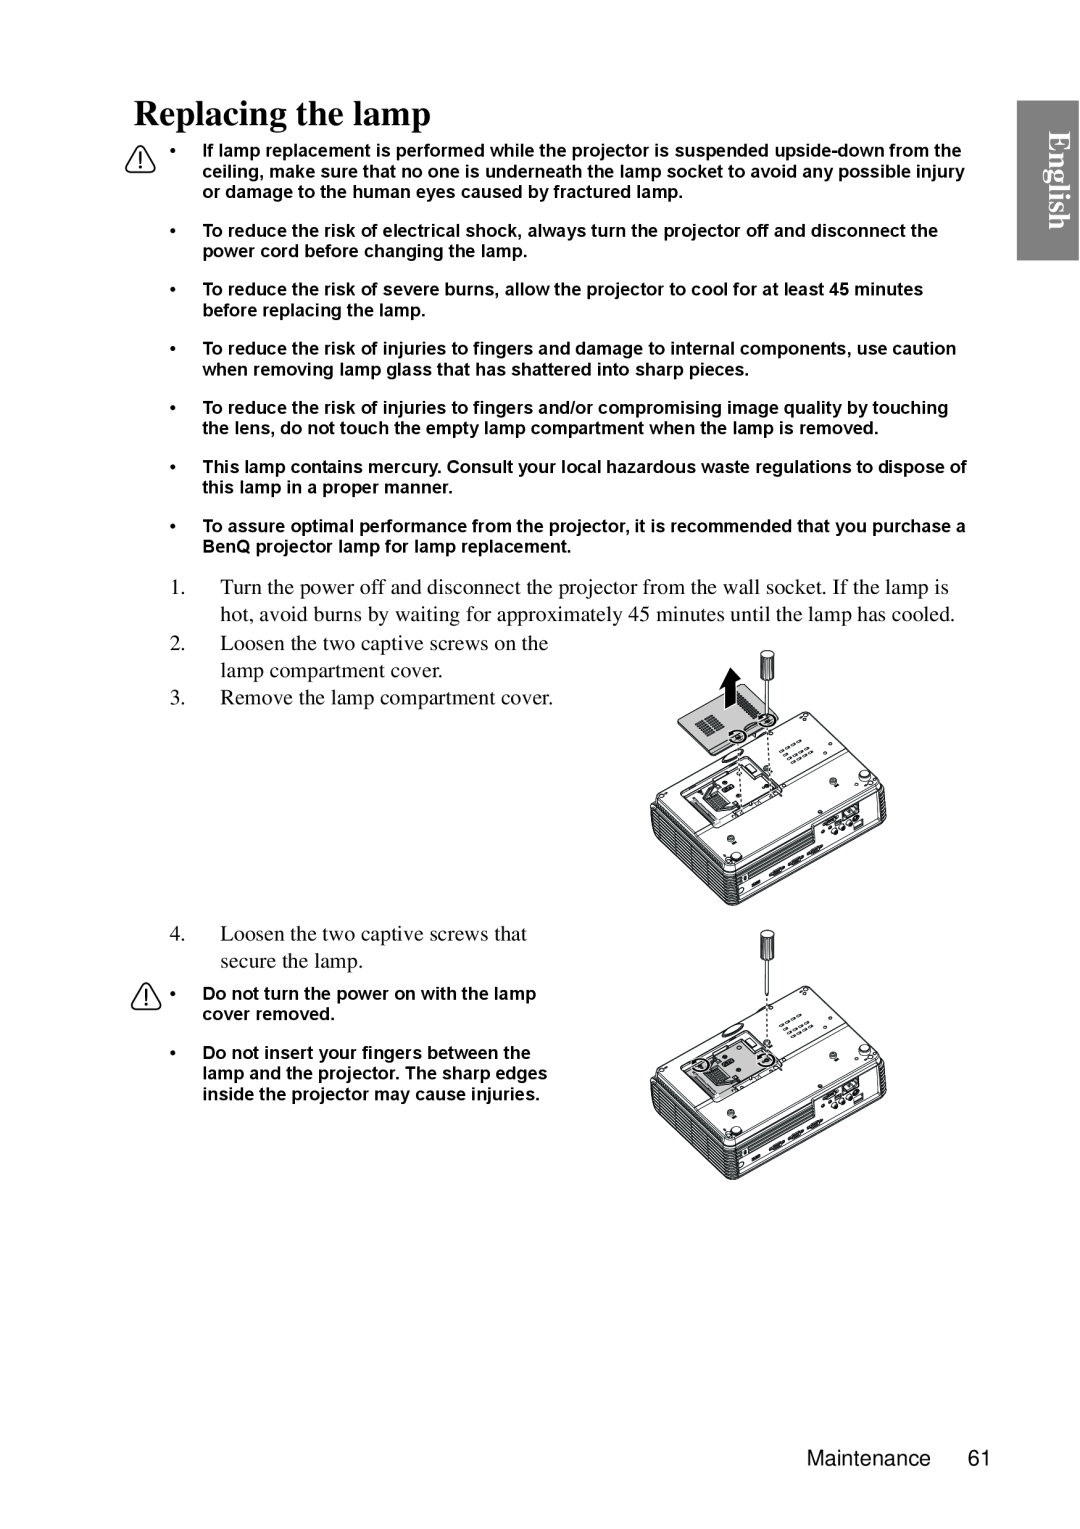 BenQ MP670 user manual Replacing the lamp, English, Loosen the two captive screws on the lamp compartment cover 